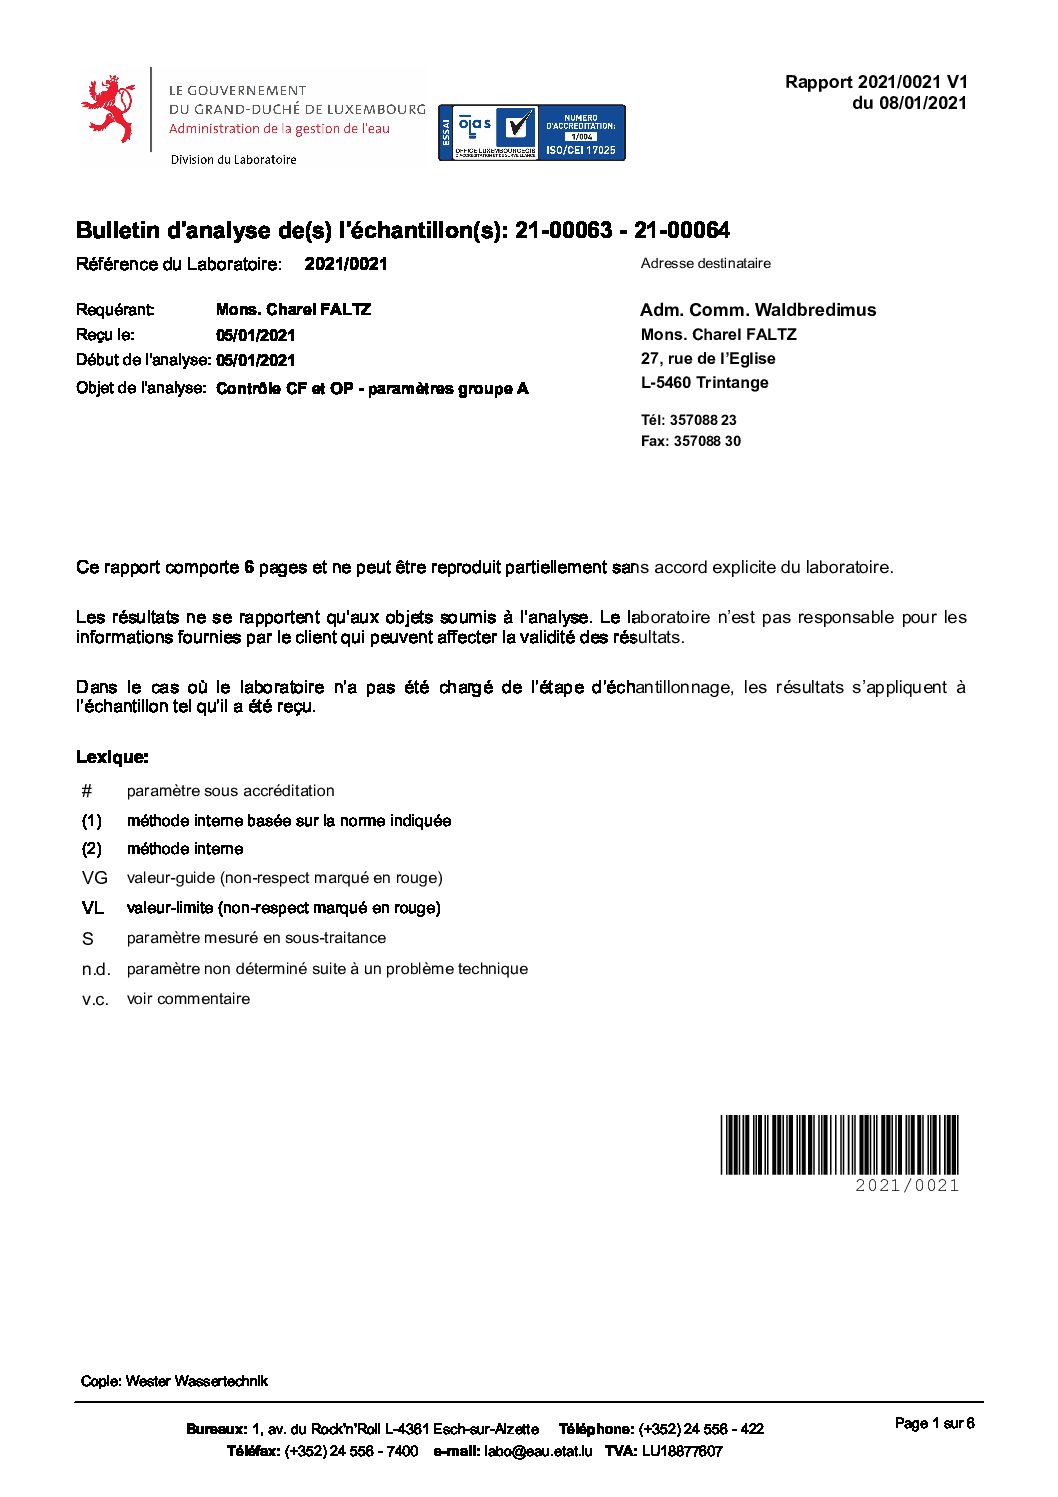 Rapport AGE 05.01.2021-1